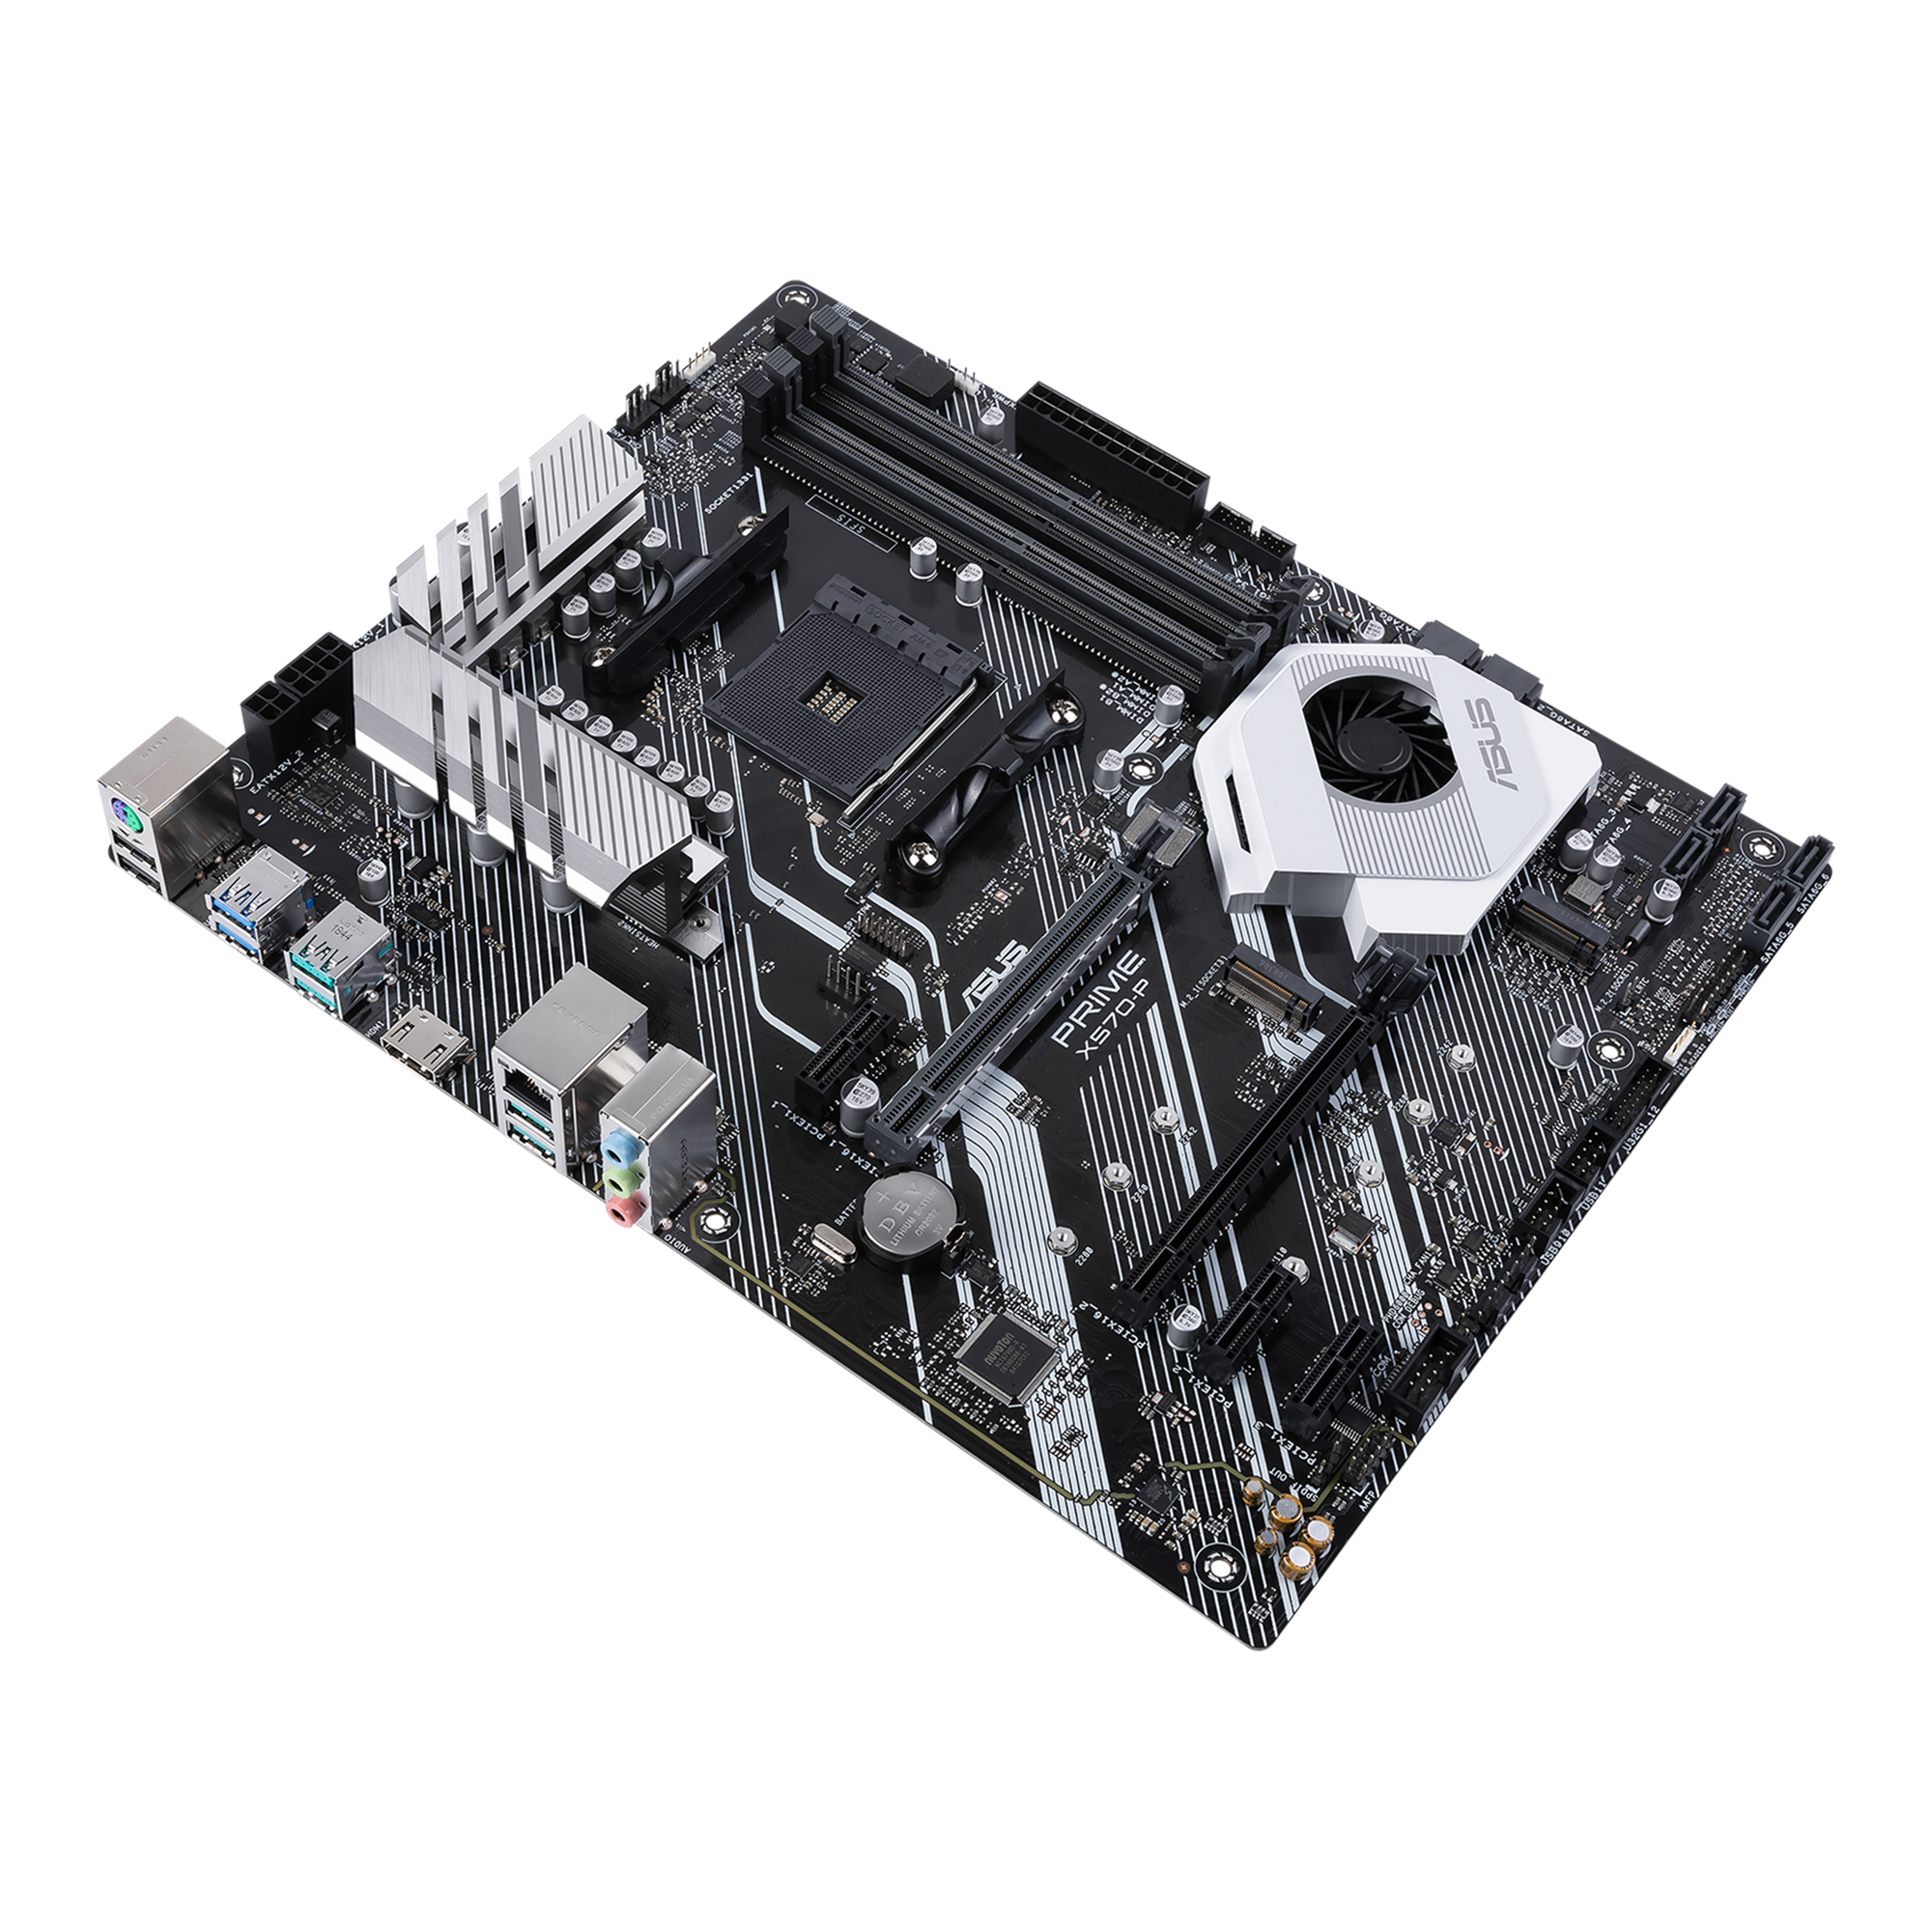 Prime X570 P Motherboards Asus Usa